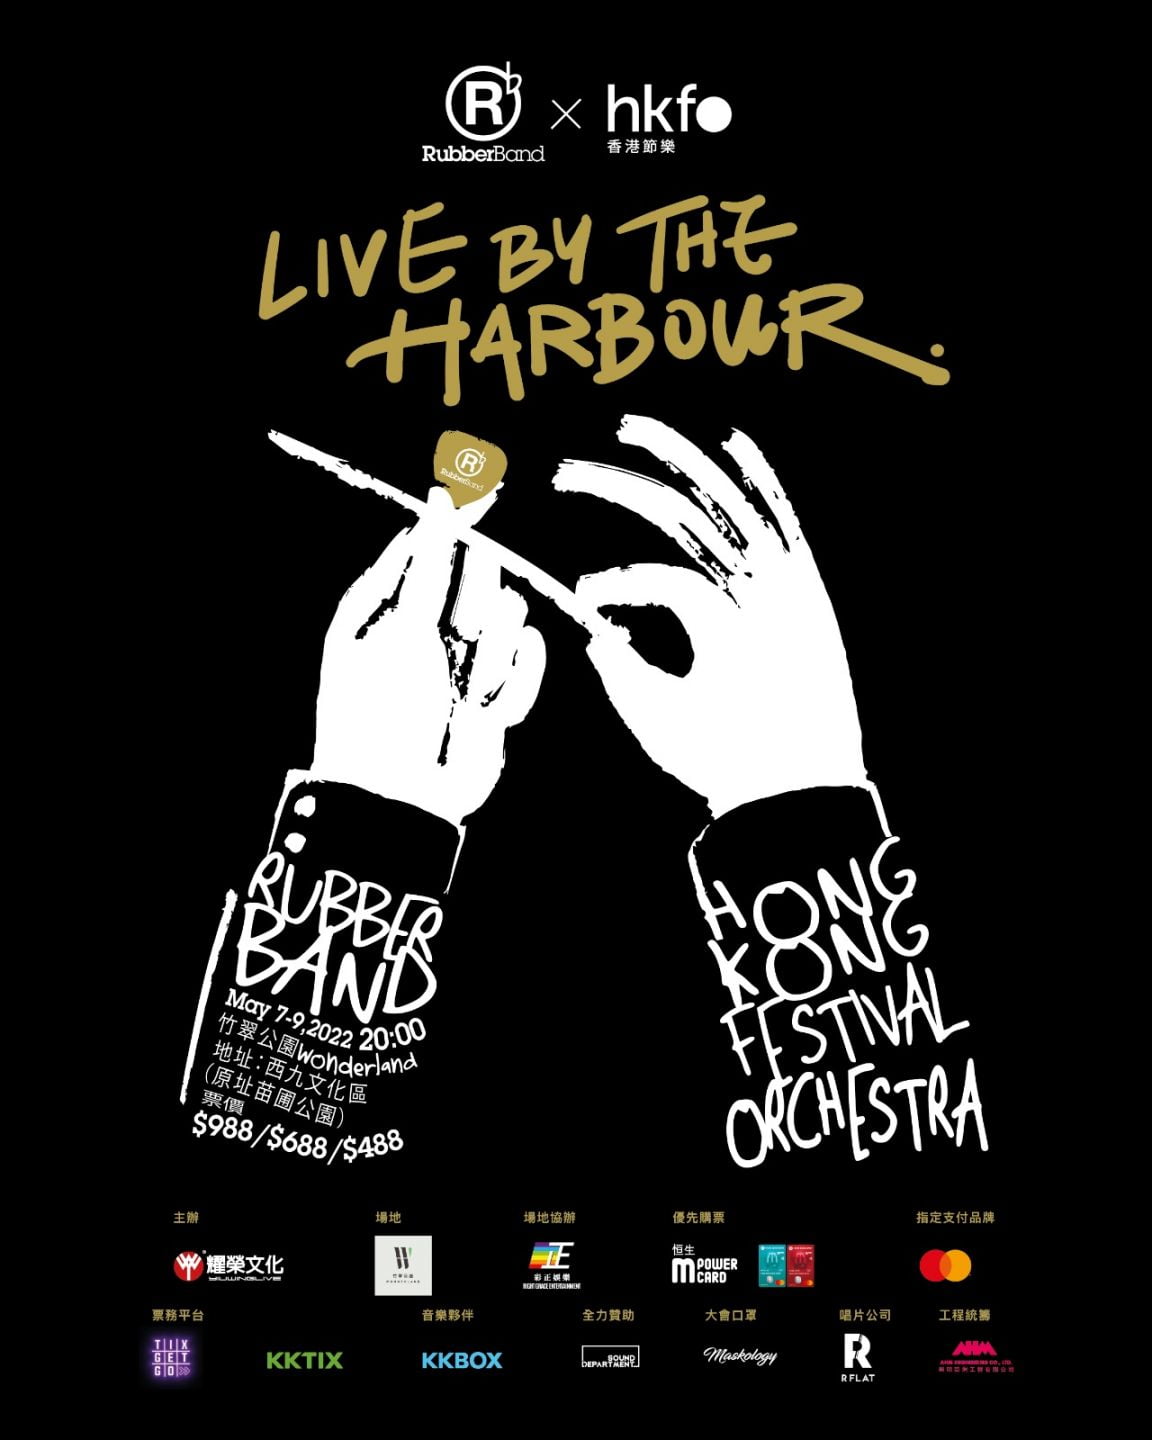 Rubberband live by the harbour